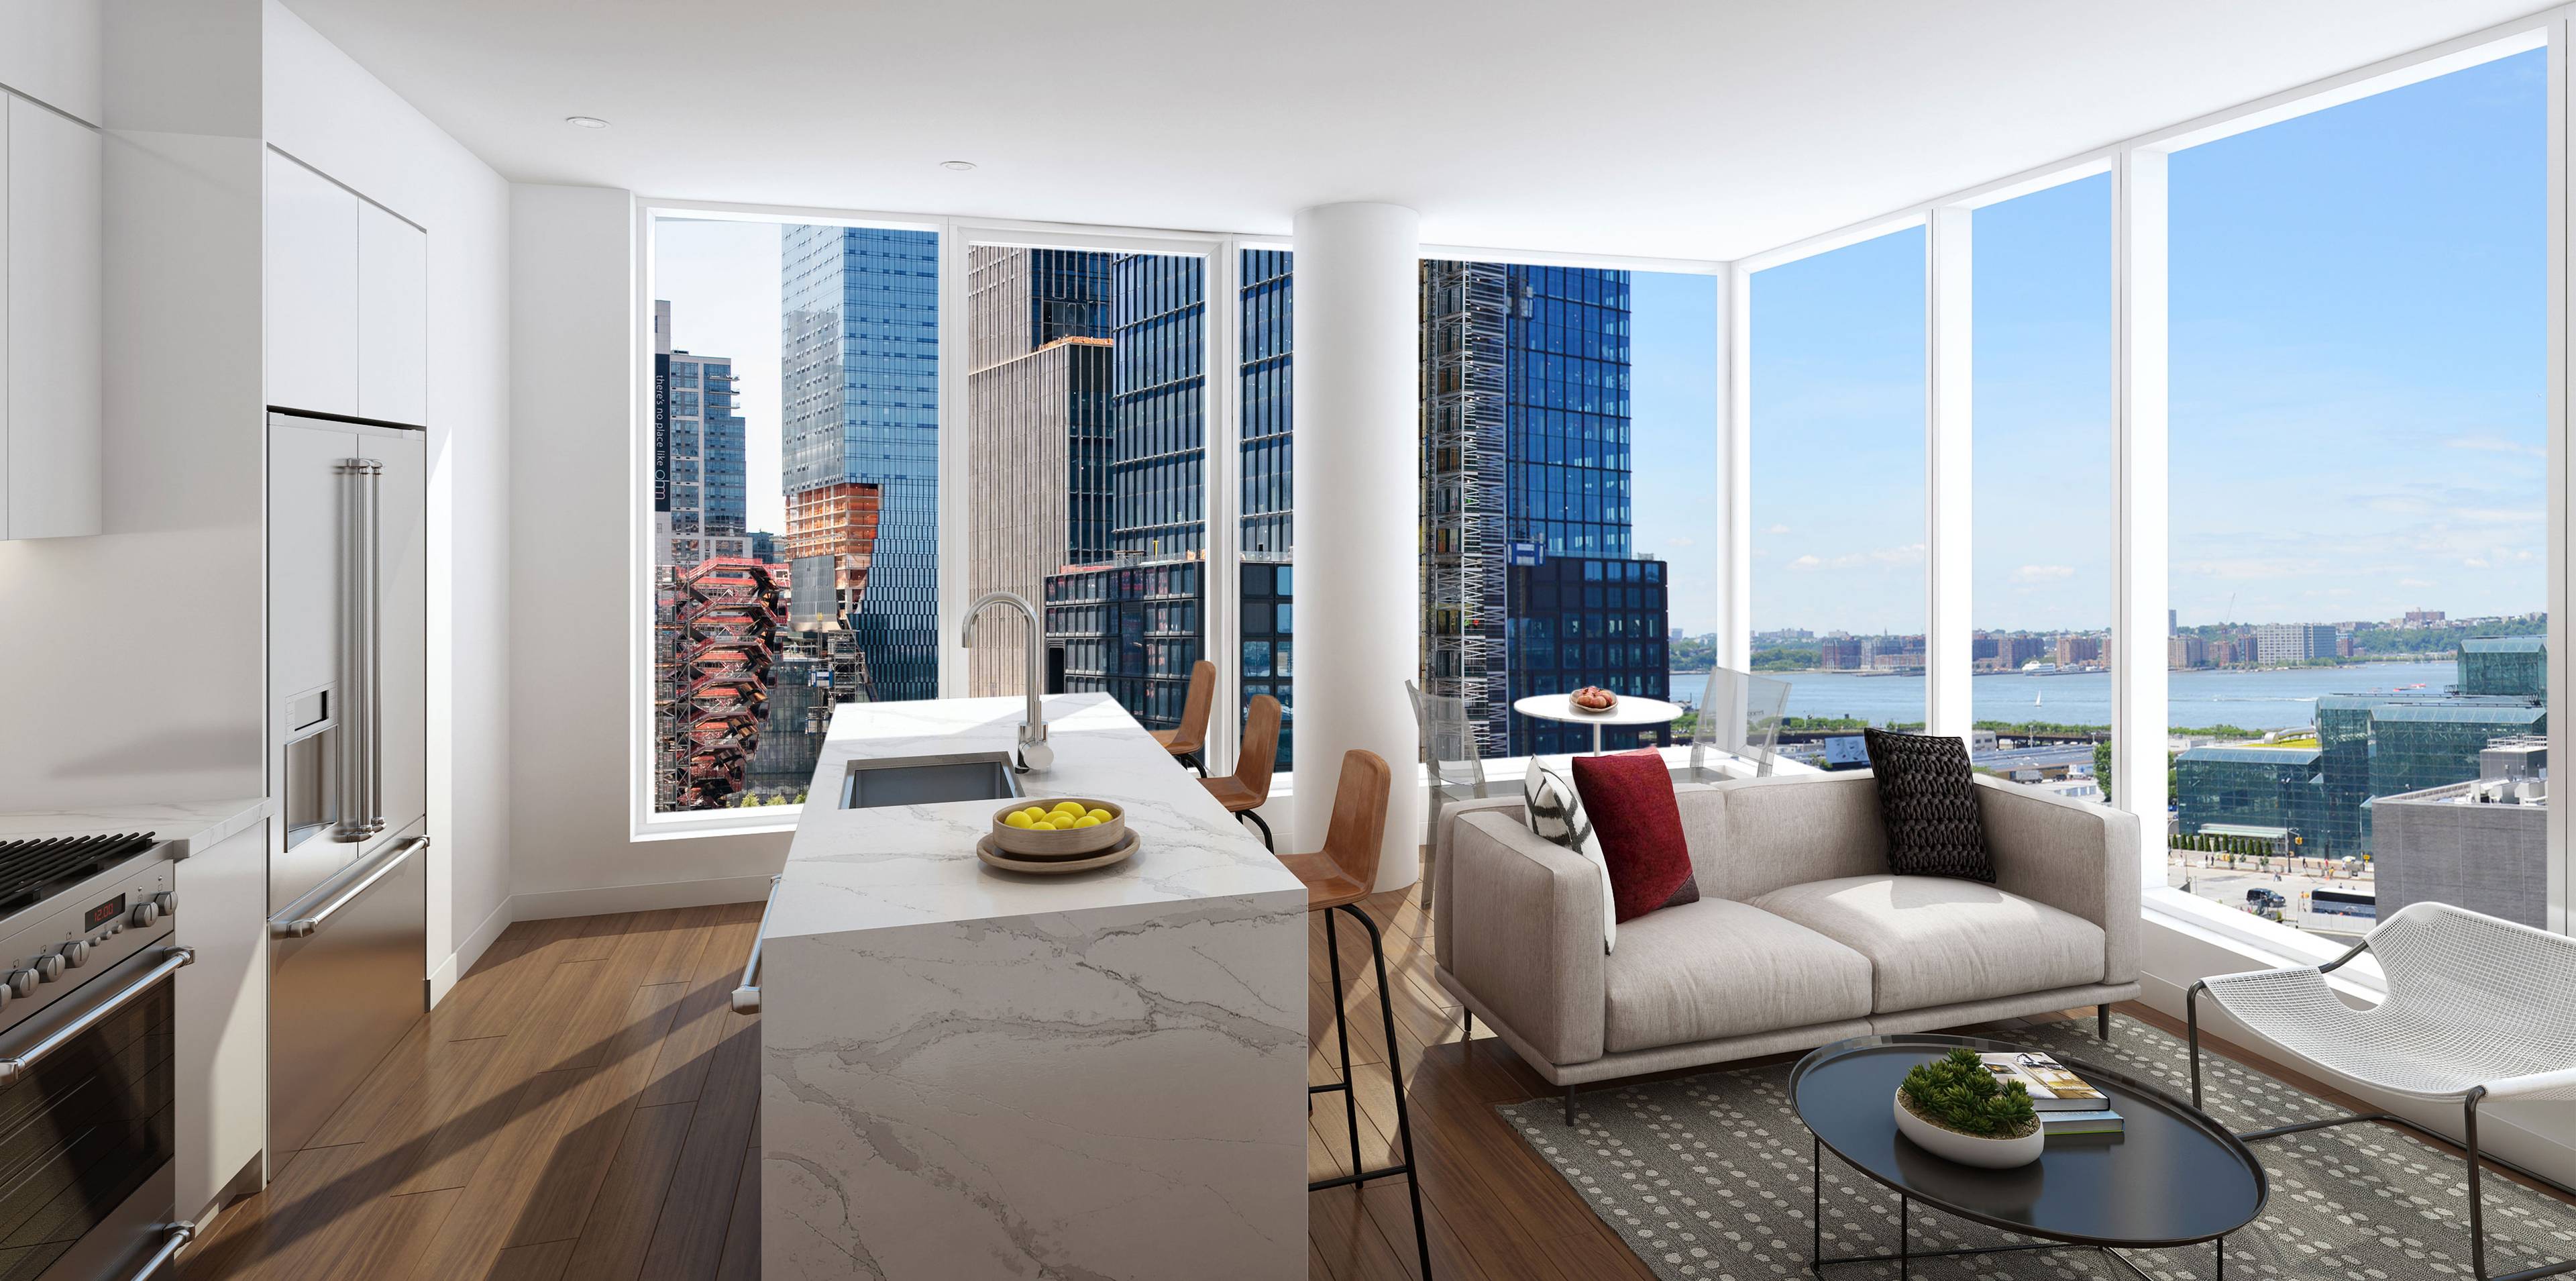 HUDSON YARDS !! Brand new studio for rent, luxury building with amazing views, 24H doorman ! NO FEE